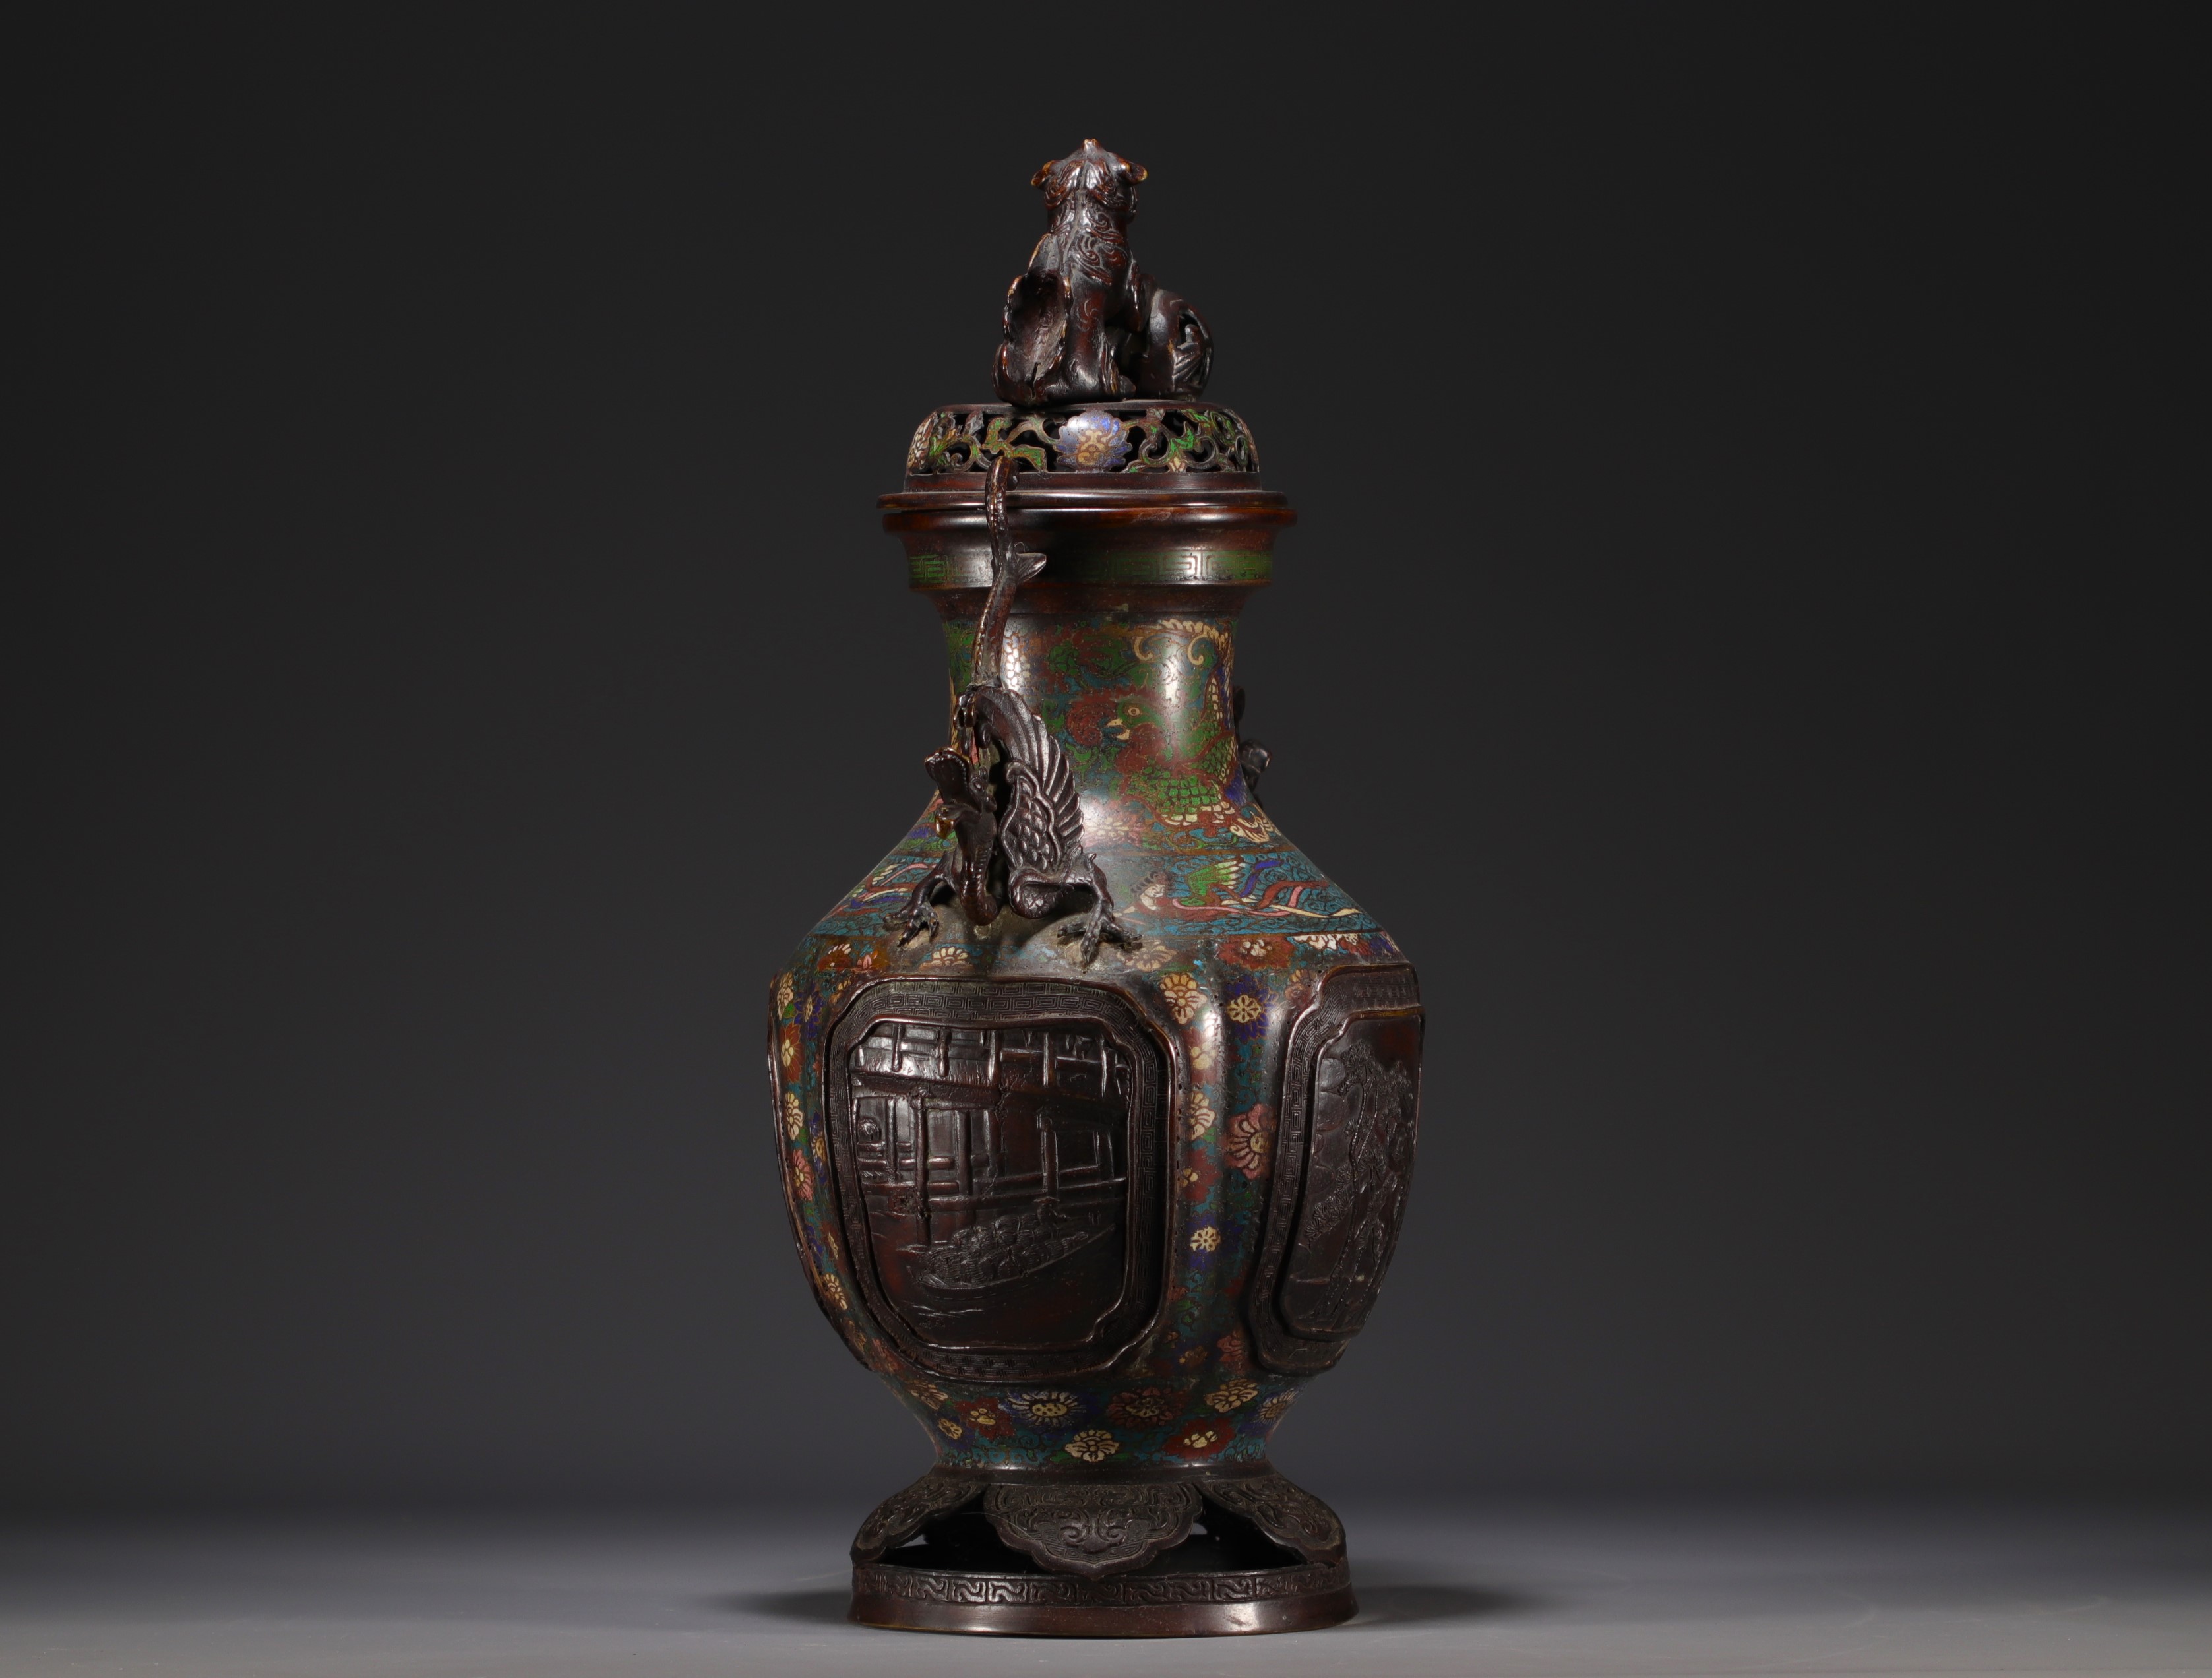 Japan - Cloisonne bronze perfume burner decorated with dragons and chimeras. - Image 3 of 4